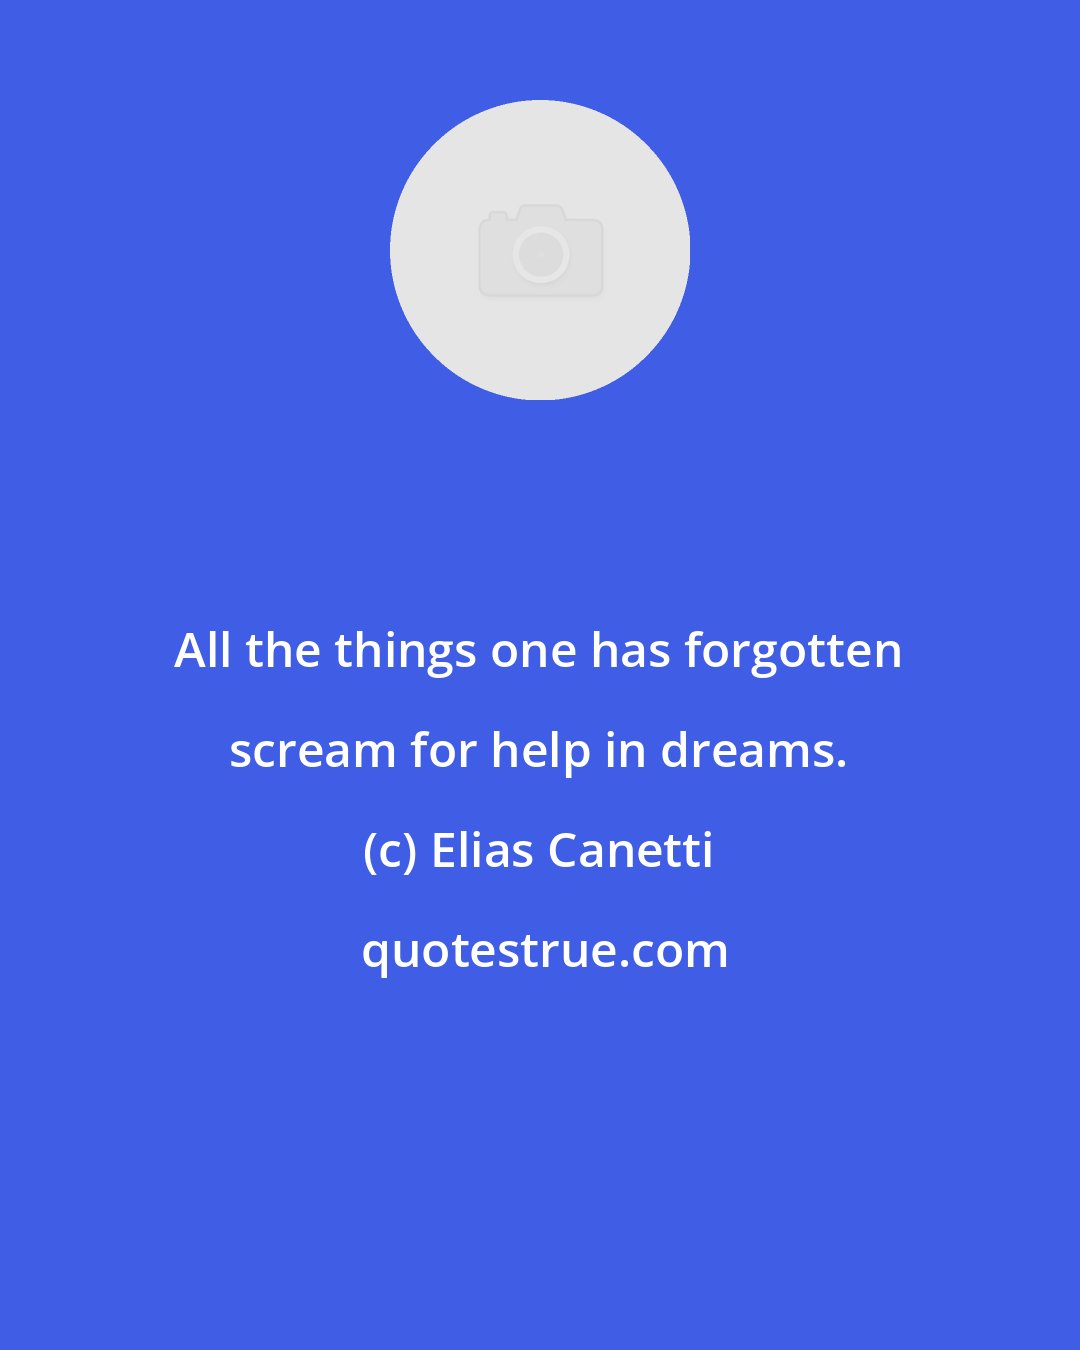 Elias Canetti: All the things one has forgotten scream for help in dreams.